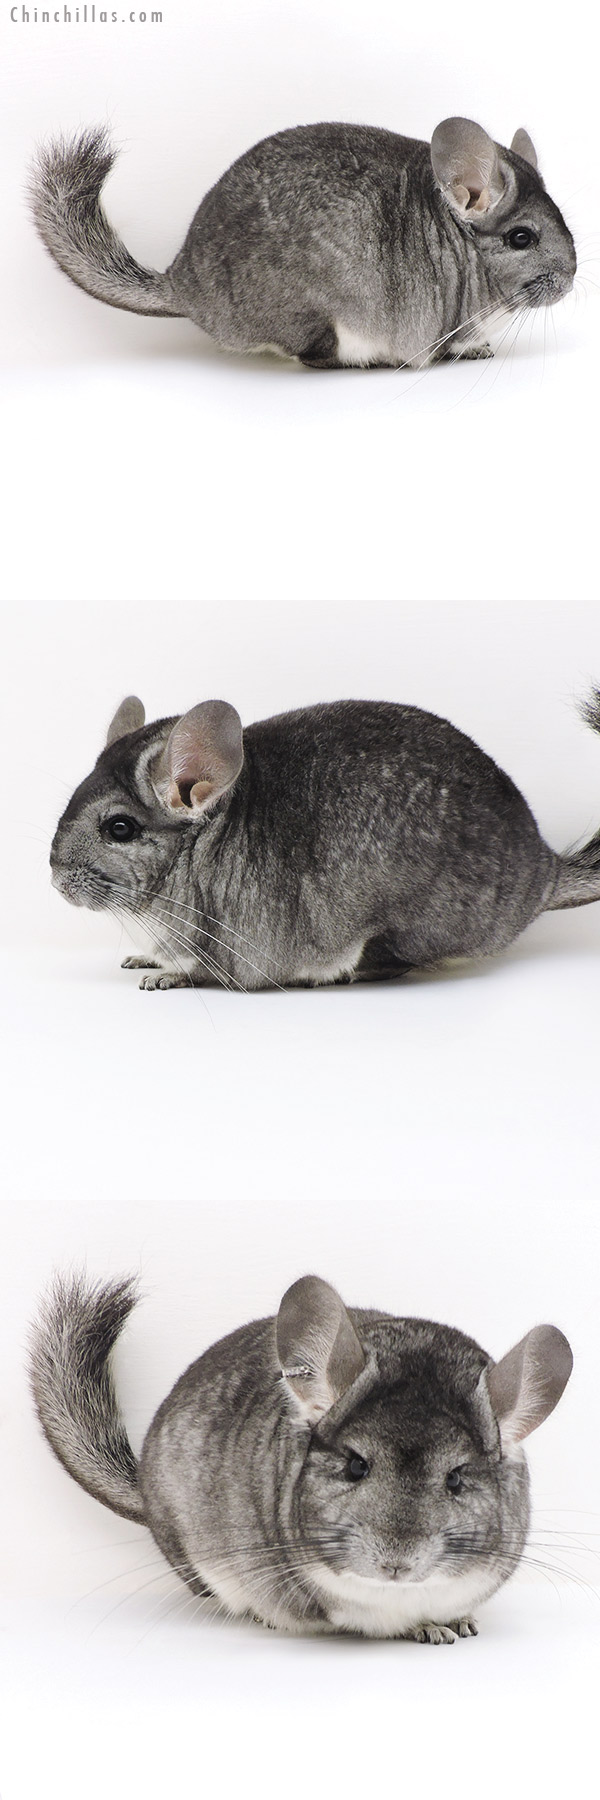 Chinchilla or related item offered for sale or export on Chinchillas.com - 17228 Standard ( Sapphire &  Royal Persian Angora Carrier ) Female Chinchilla